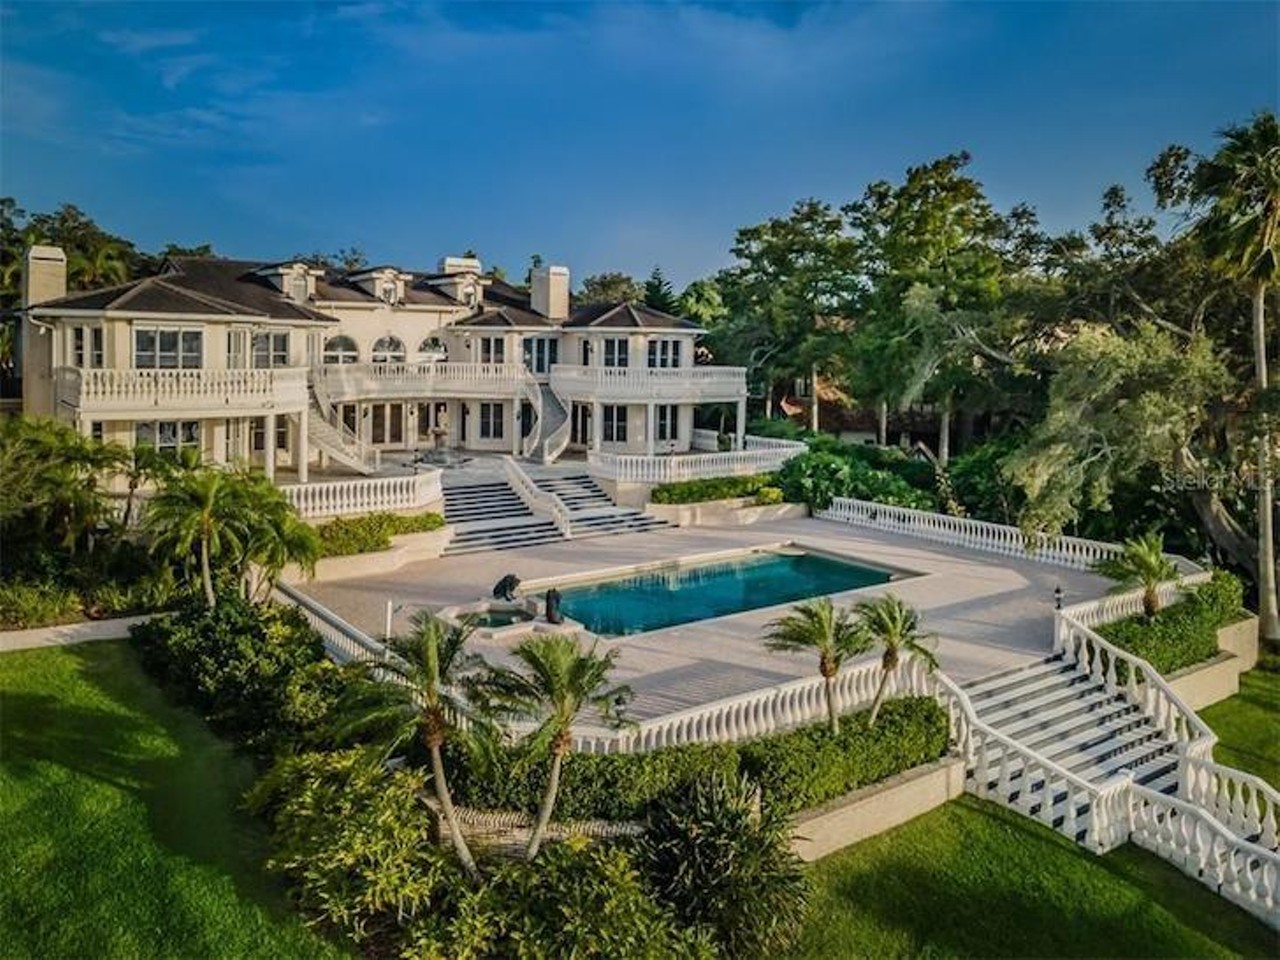 The Rinker House, built by a Florida cement tycoon, is back on the market in Tampa Bay